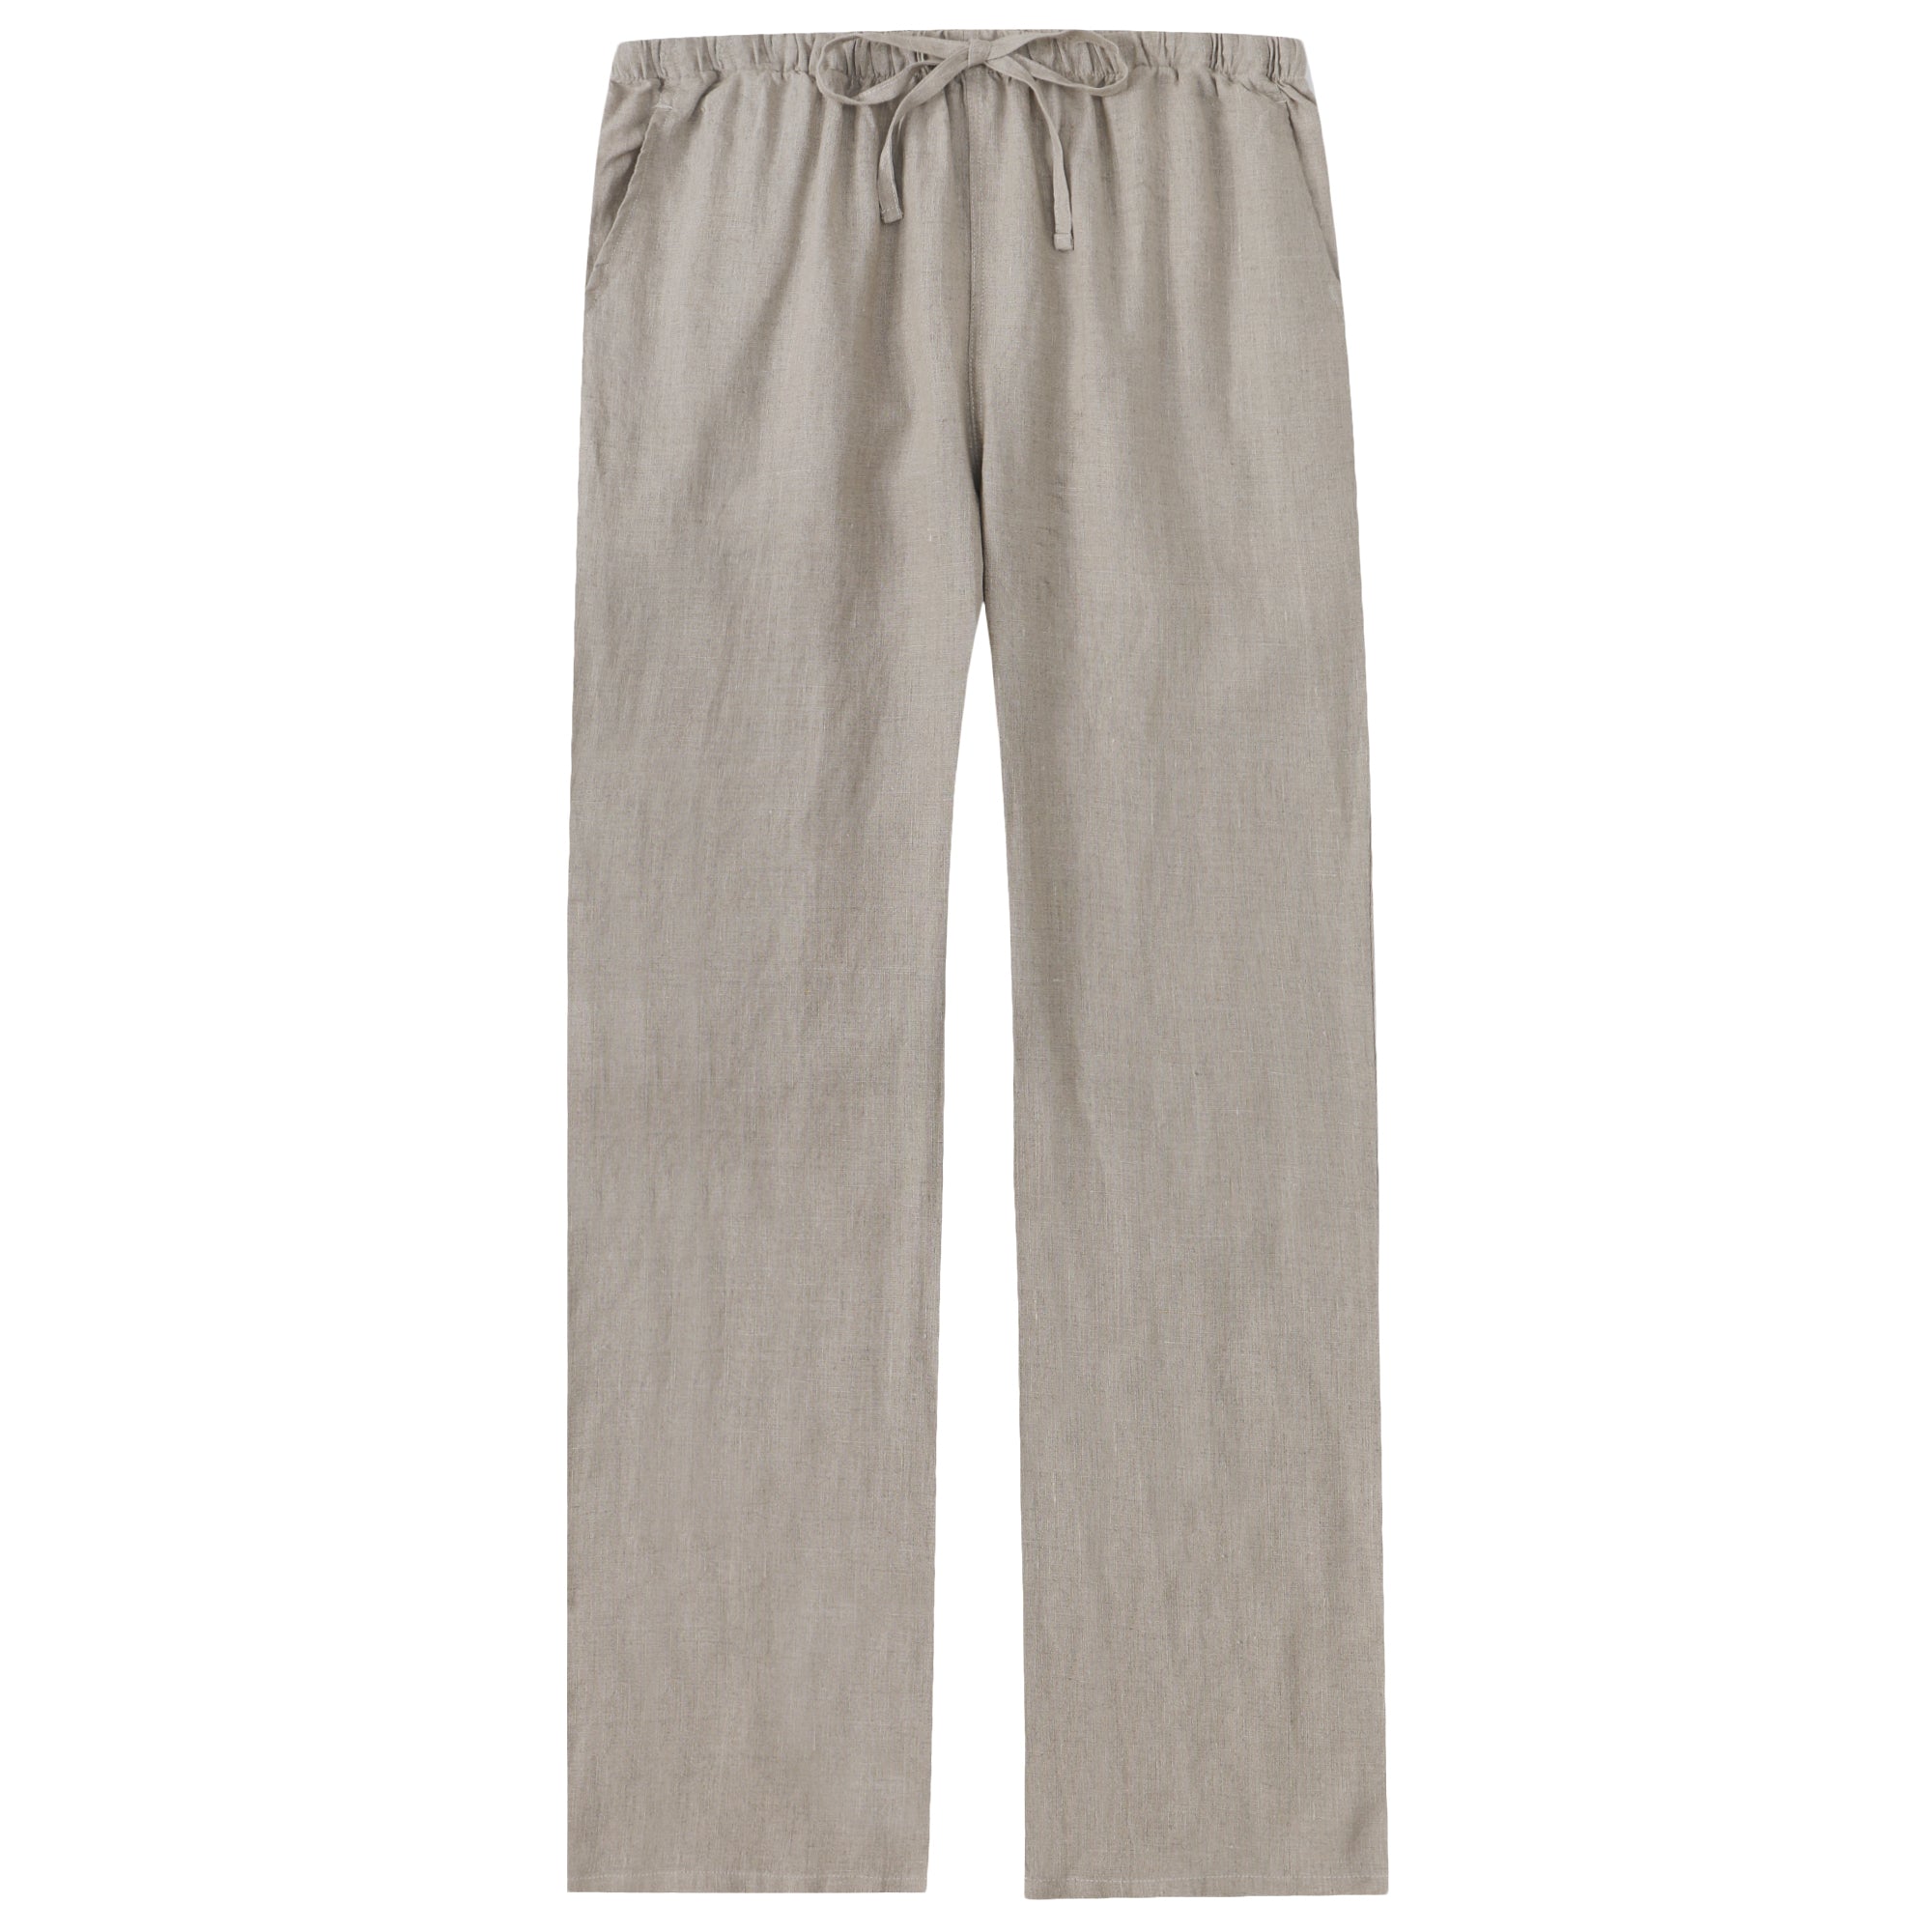 Noble Mount 100% Linen Womens Pajama Louge Pants for Summer